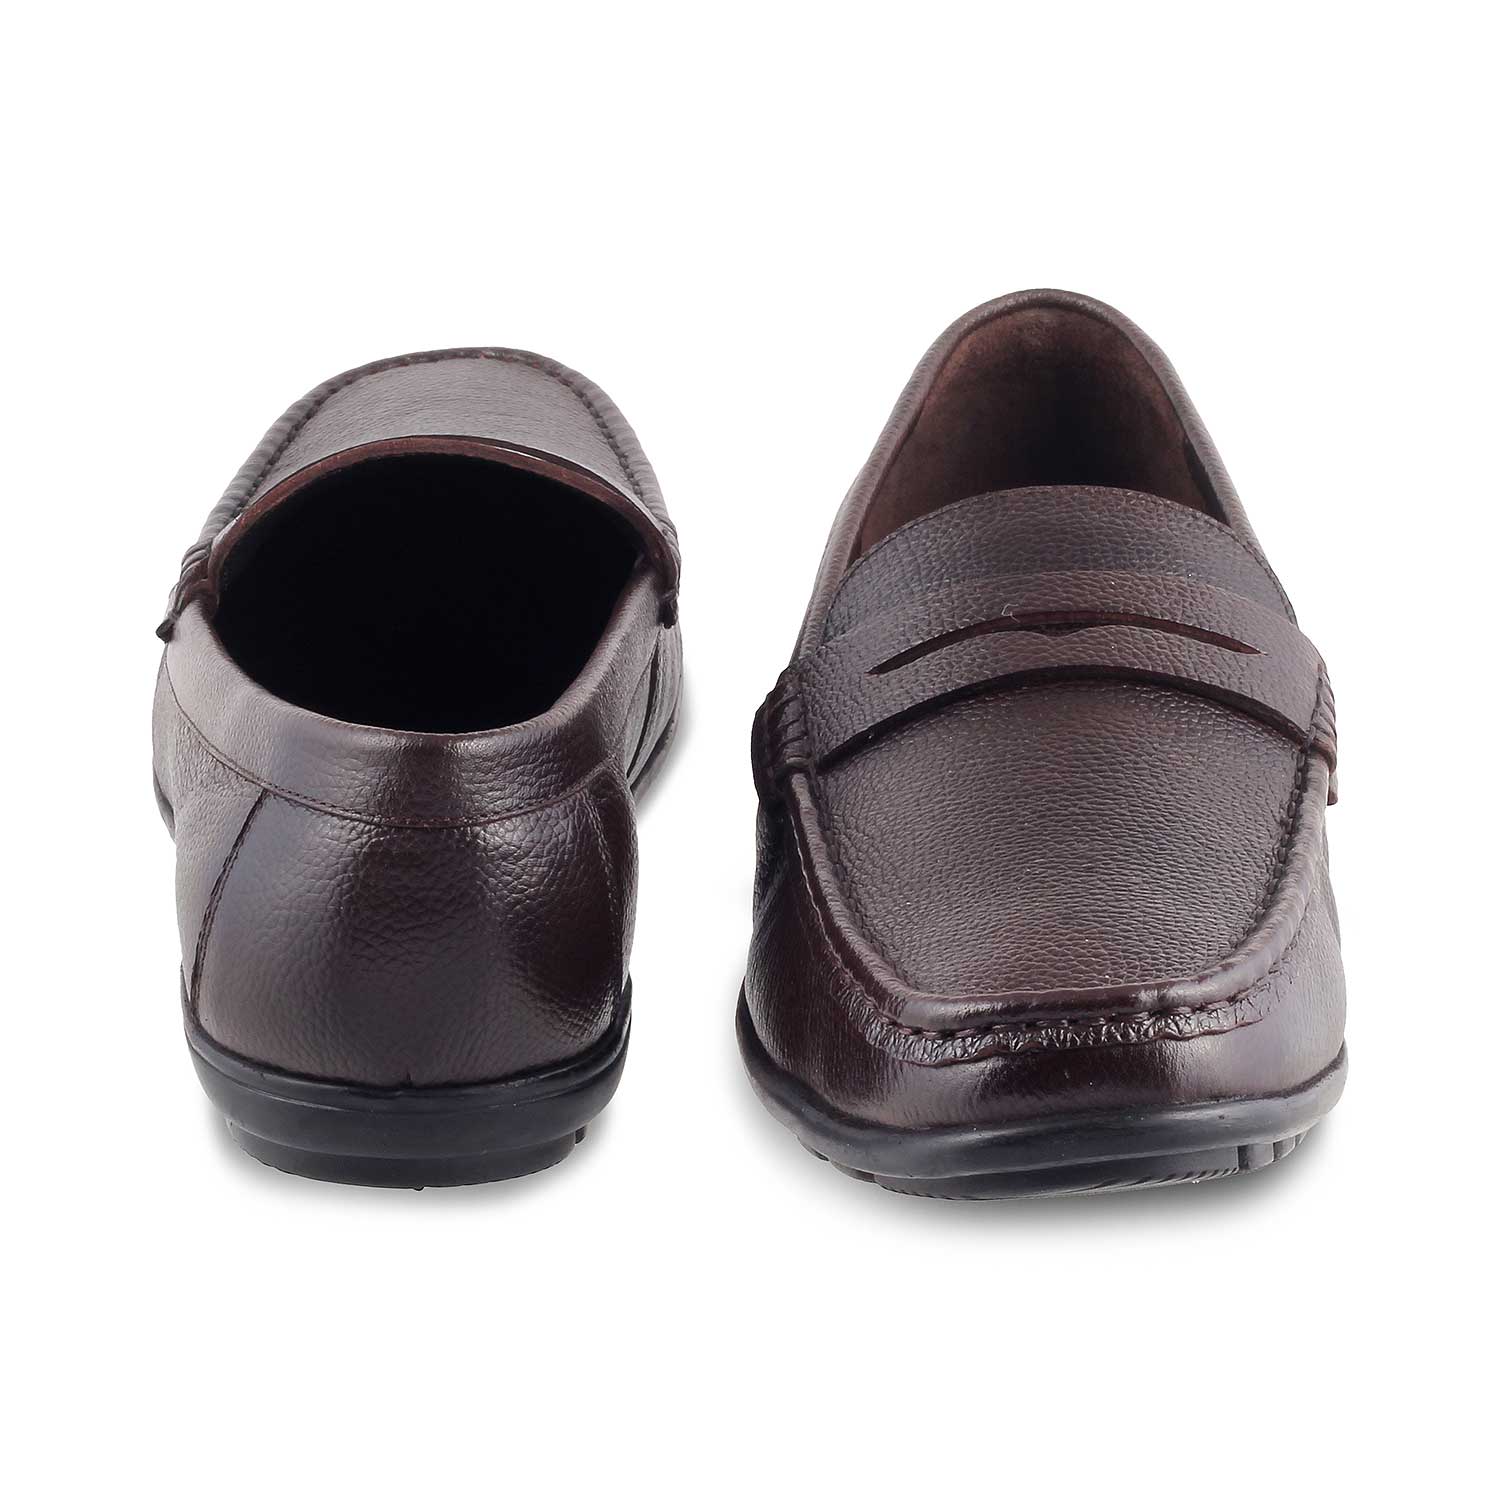 The Lemec Brown Men's Leather Penny Loafers Tresmode